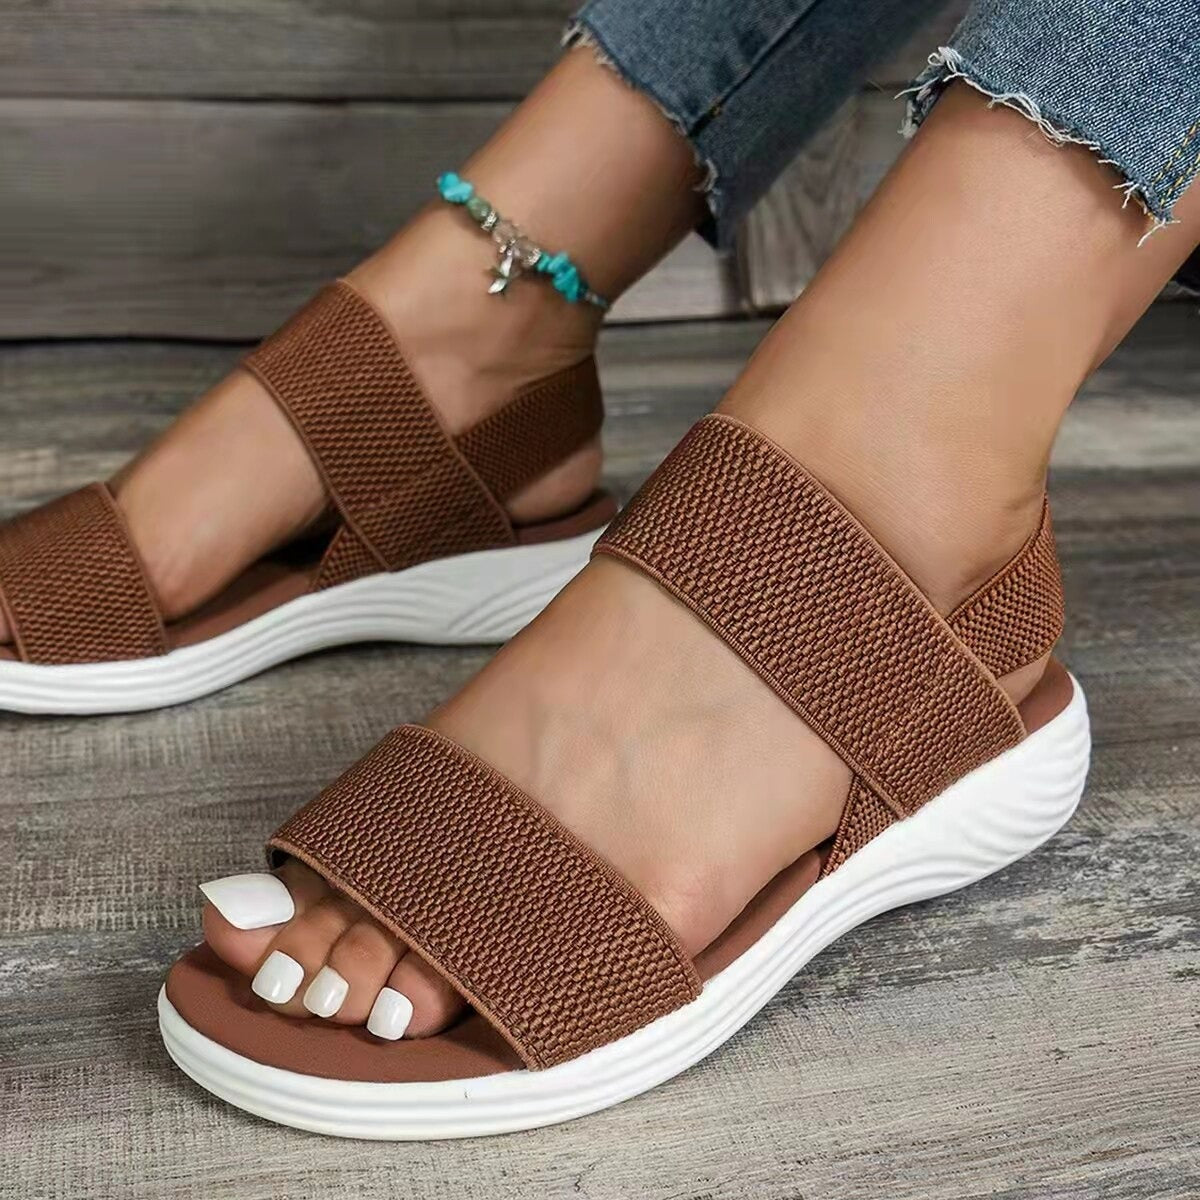 Comfortable Sandals For Women Elastic Band Casual Summer